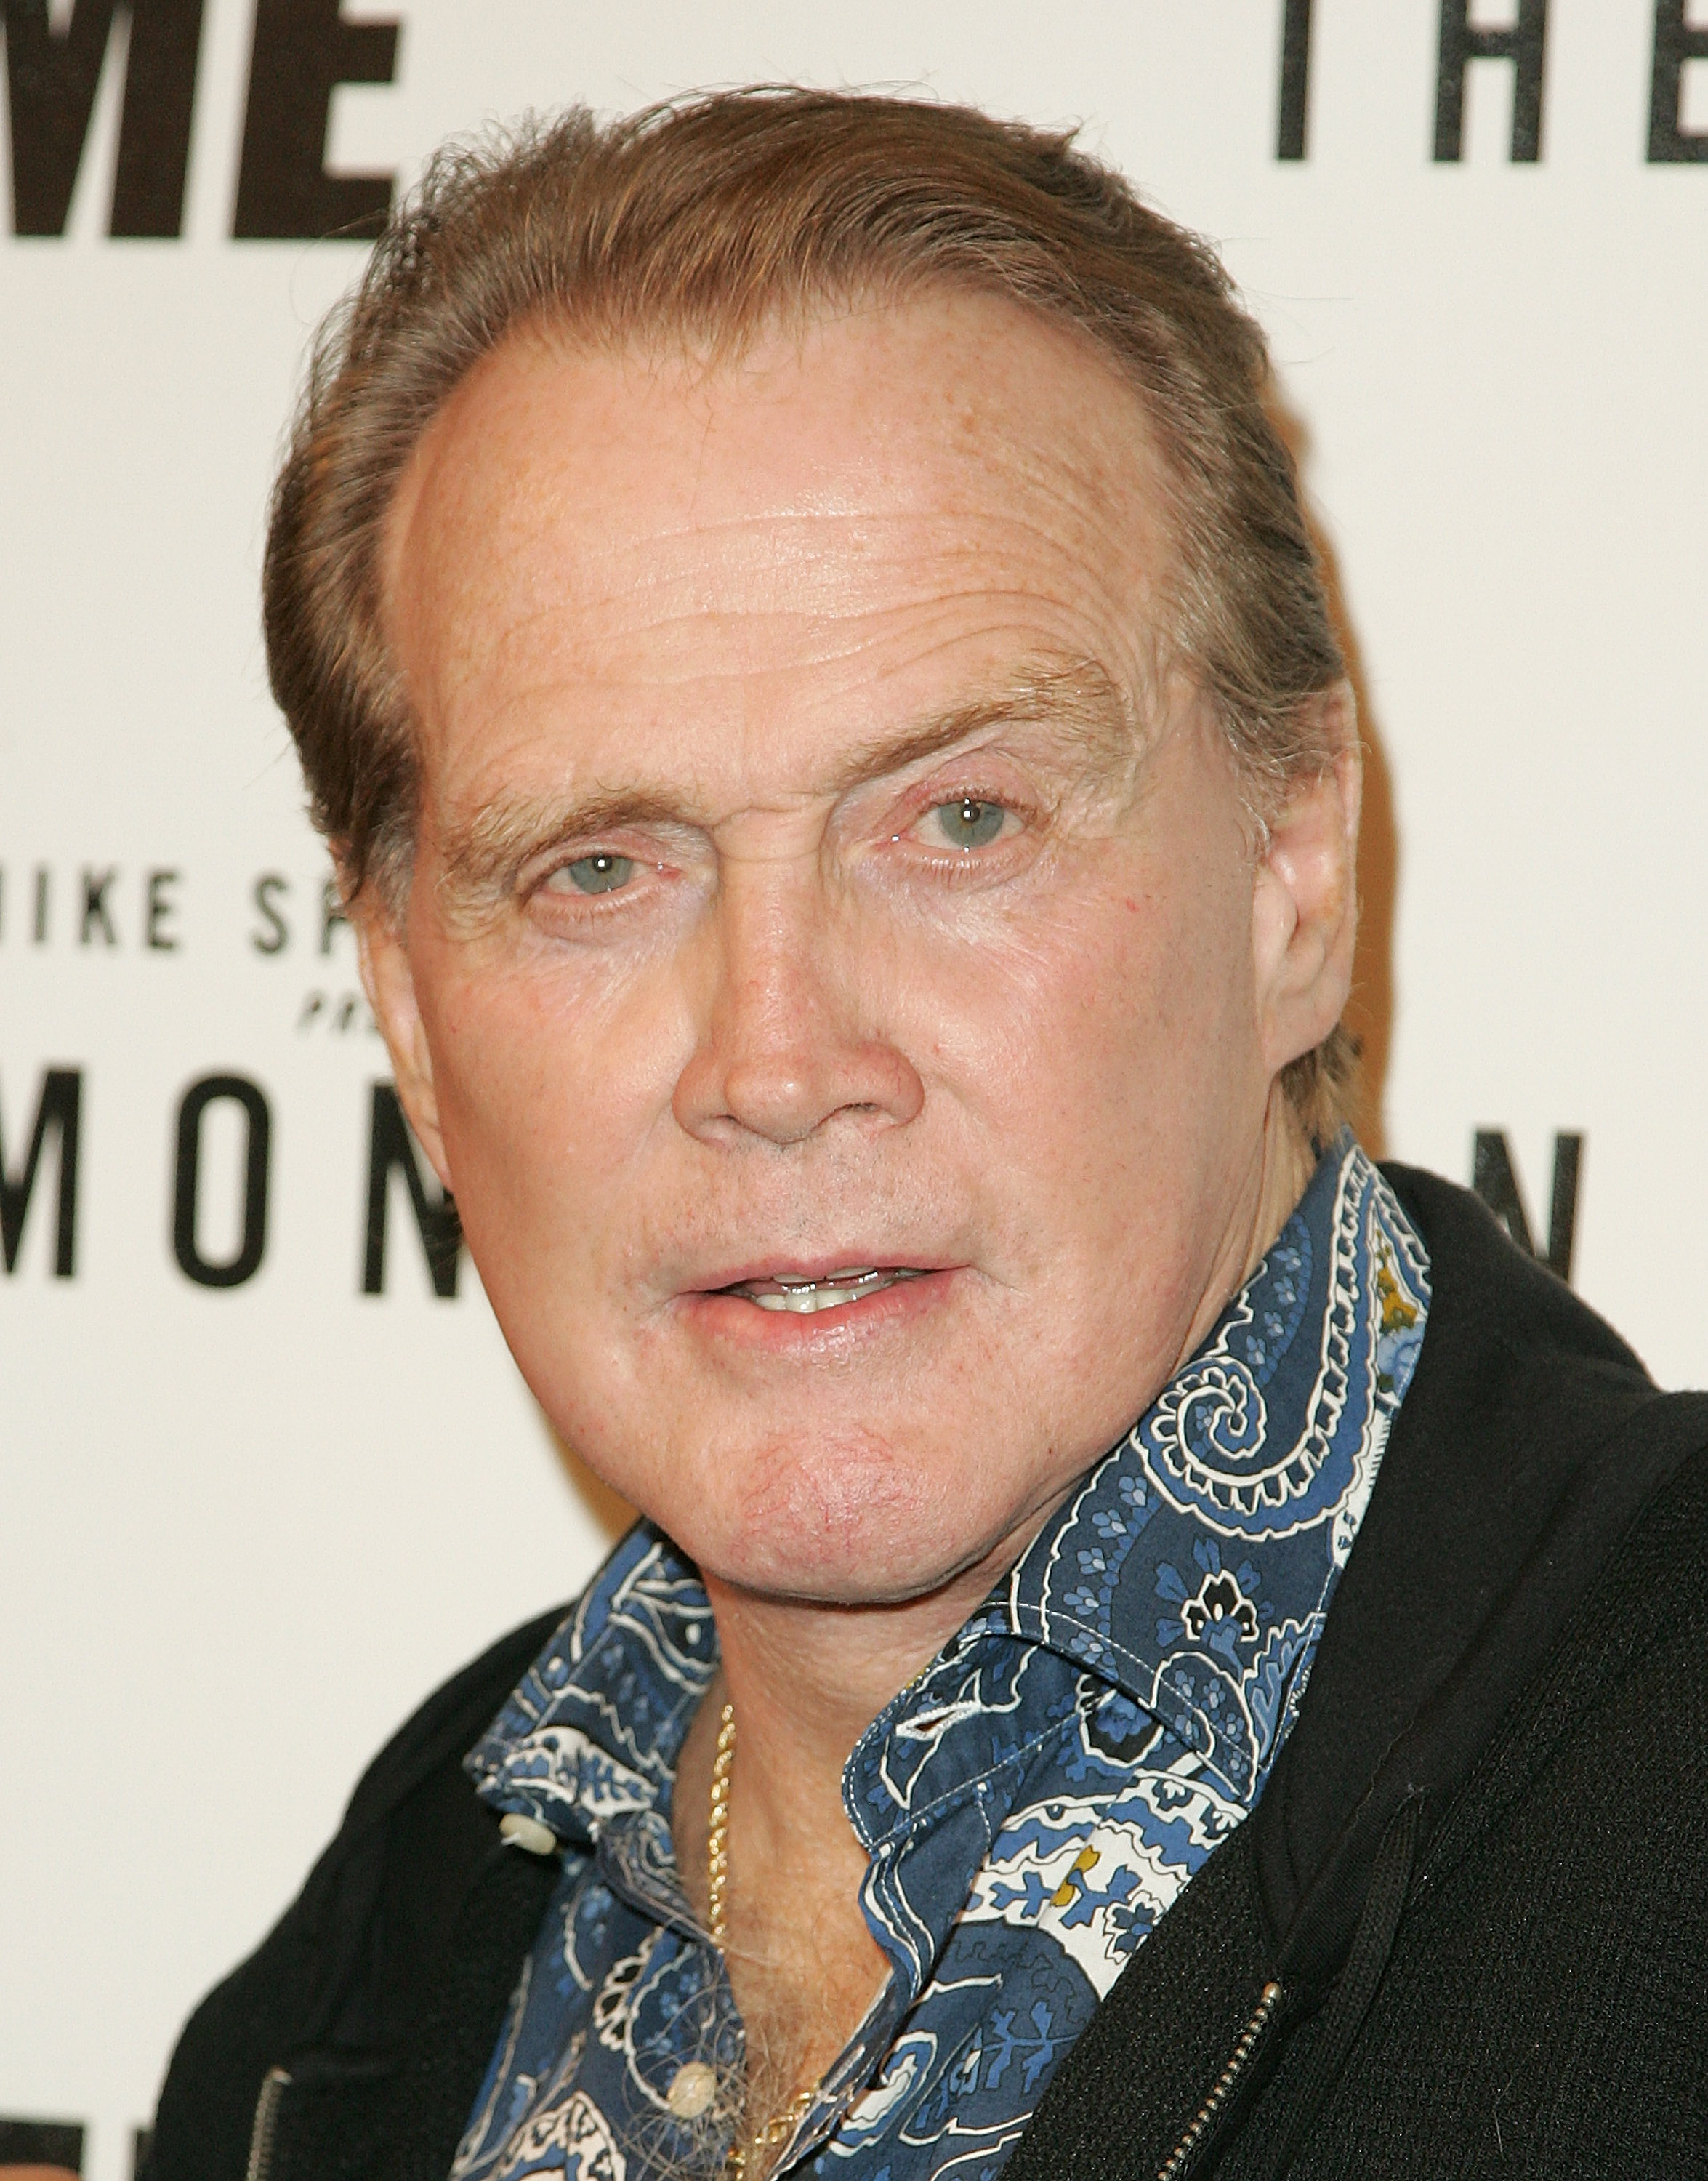 Lee Majors attends CBS Paramount network television's "The Game" premiere party at The Montalban on September 27, 2008, in Hollywood, California | Source: Getty Images